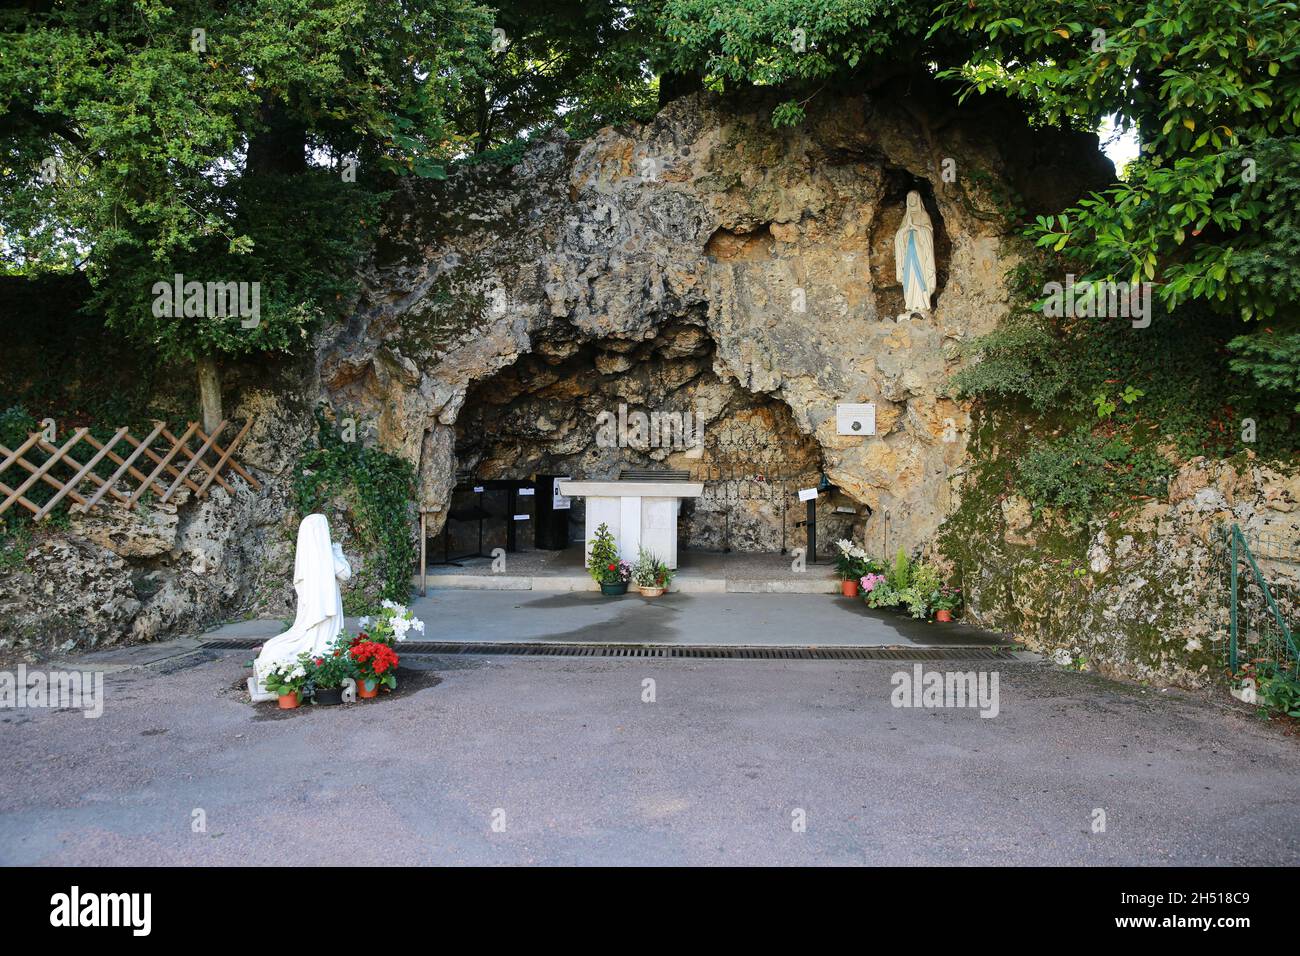 The Sanctuary of Our Lady of Lourdes, Nevers, France Stock Photo